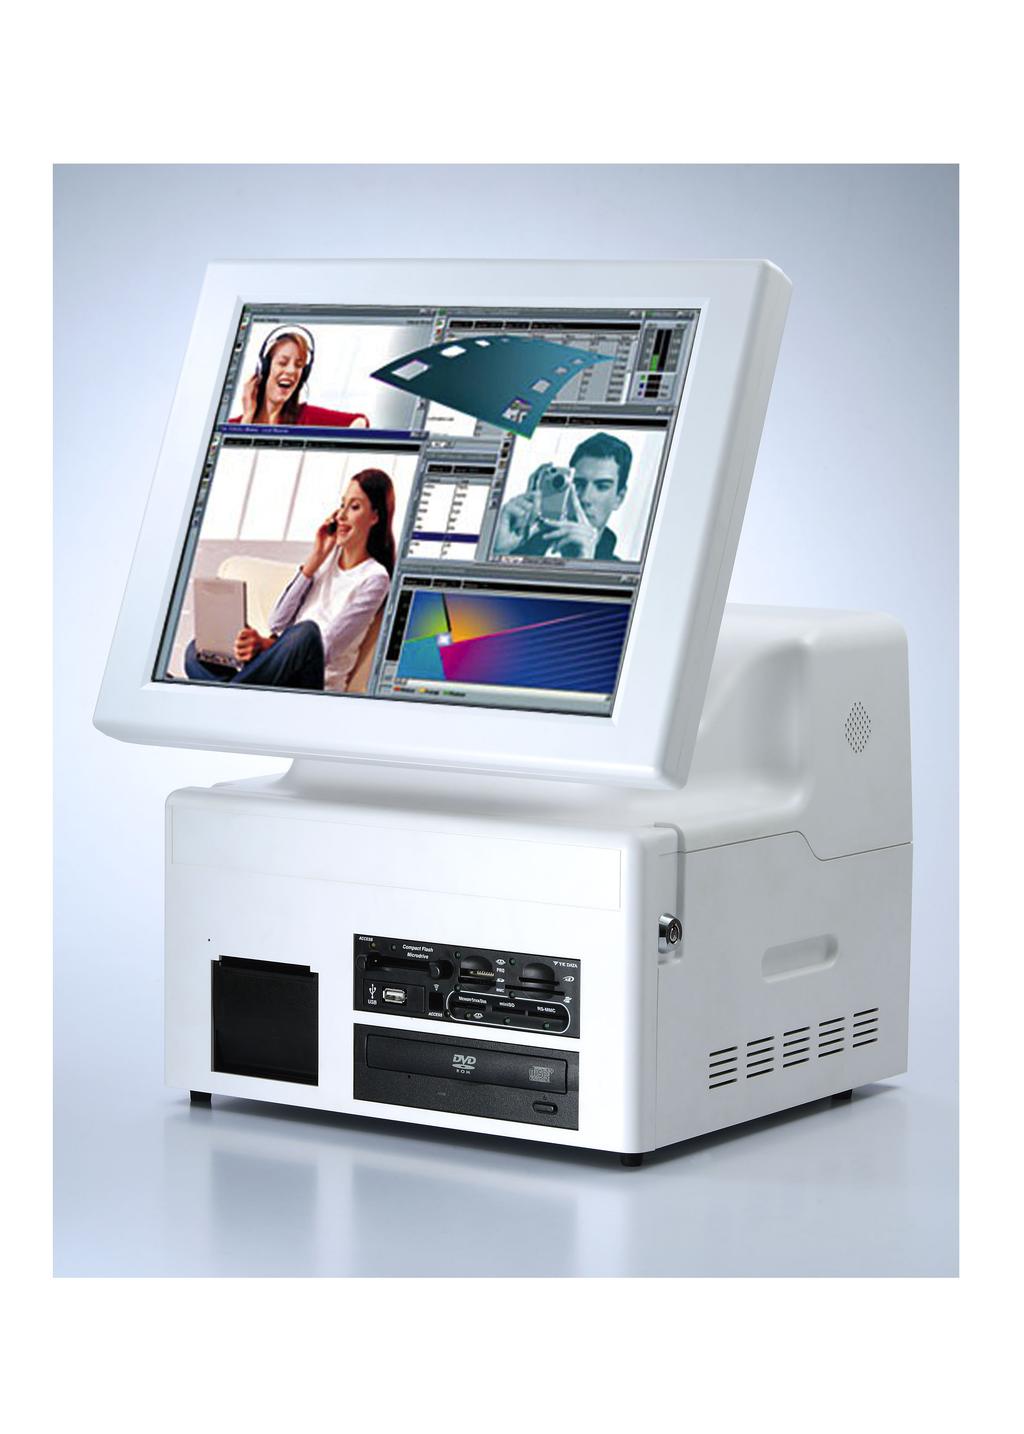 Digital Station Information Instant photo printing, passport photo and Archive CD Online picture service for digital photos and fun products All popular